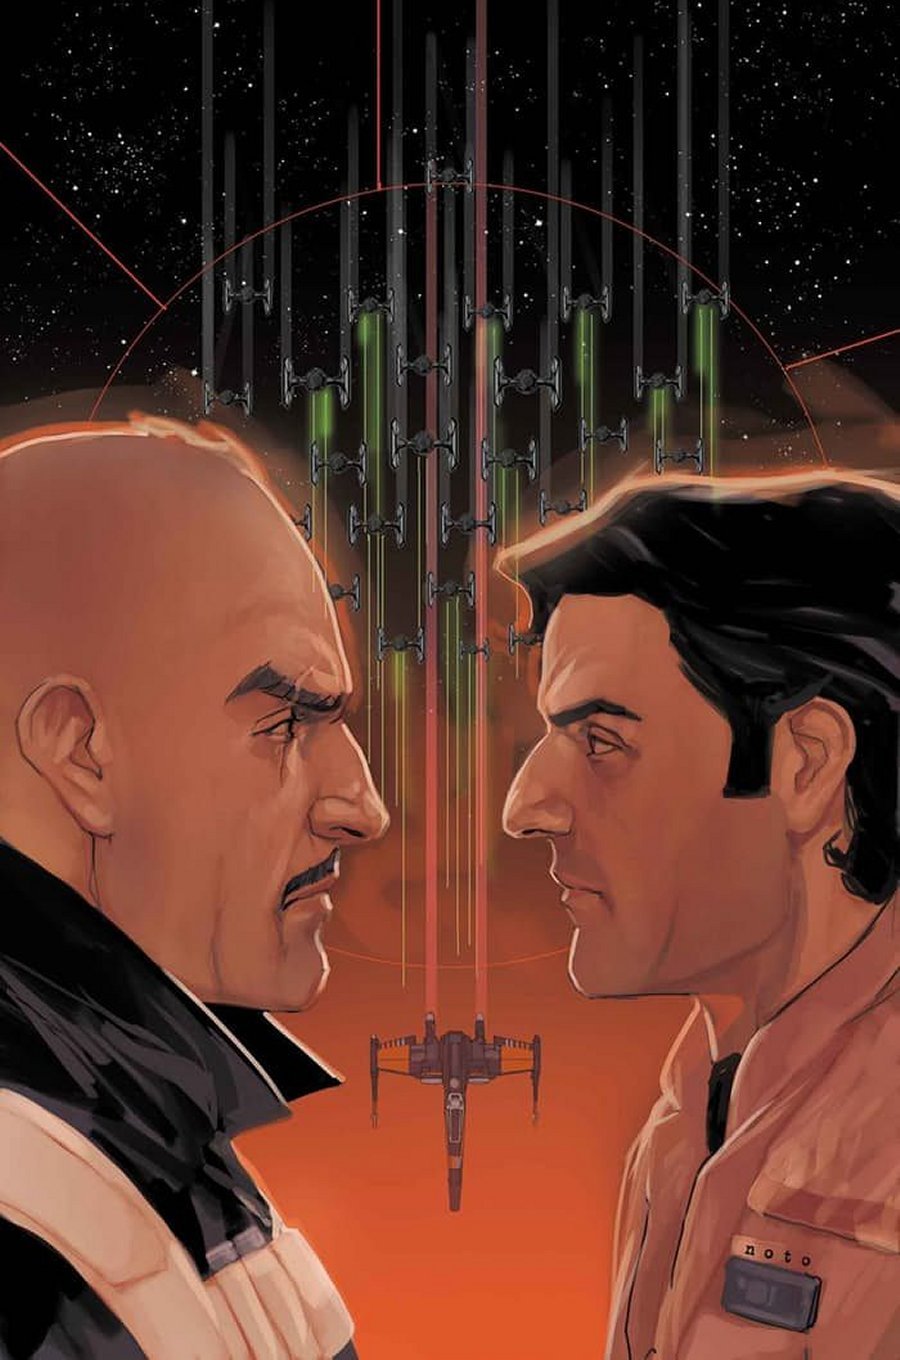 Consumed by Star Wars Feelings — Star Wars Illustrations by Phil Noto